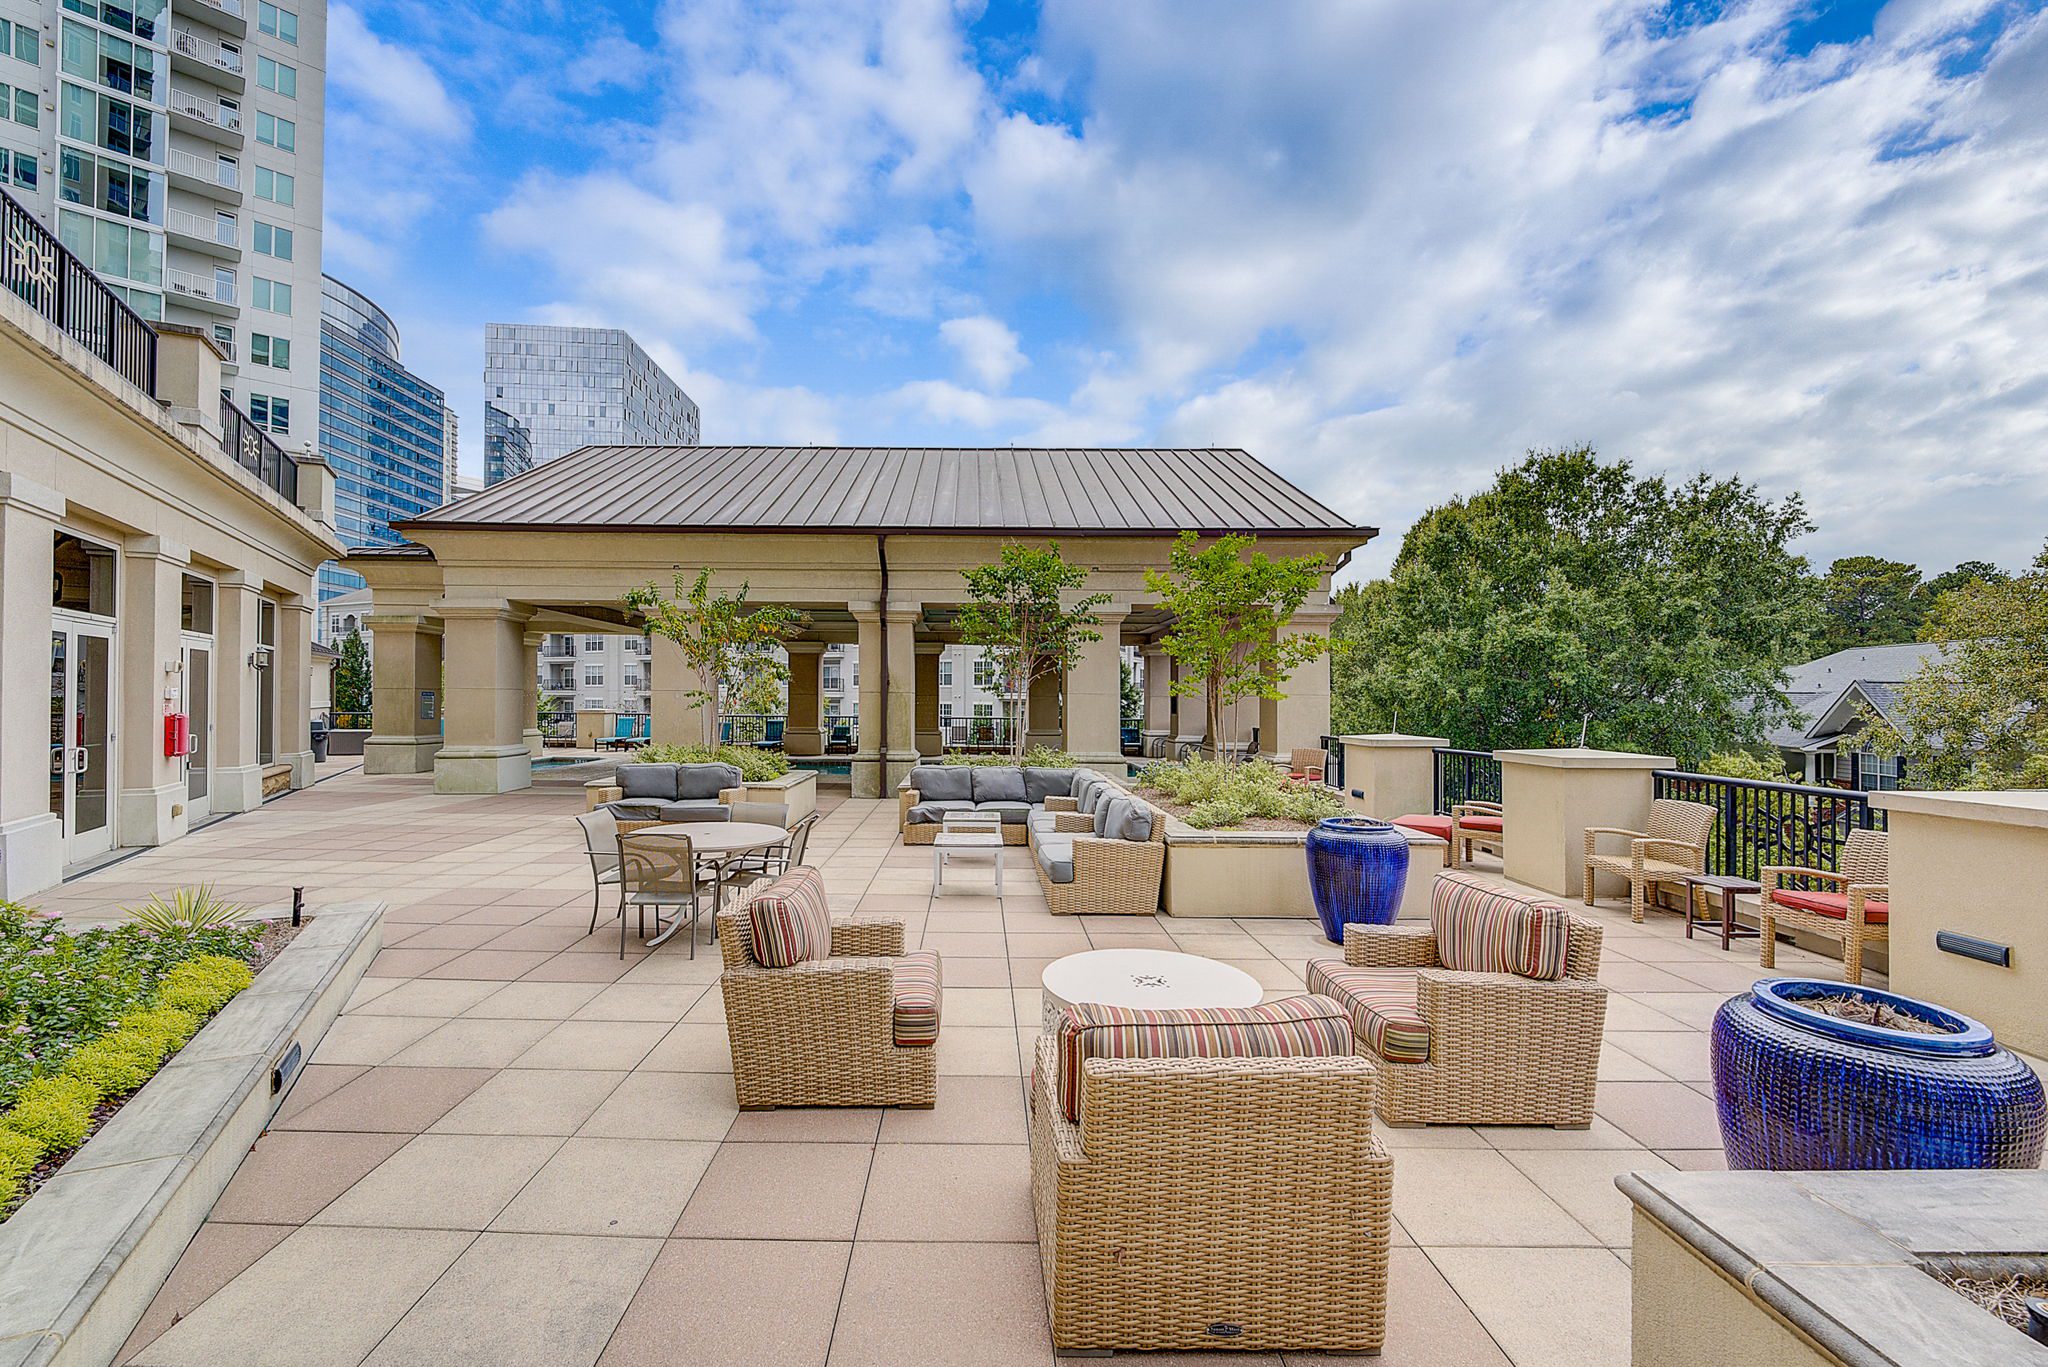 A city view from a patio with furniture.